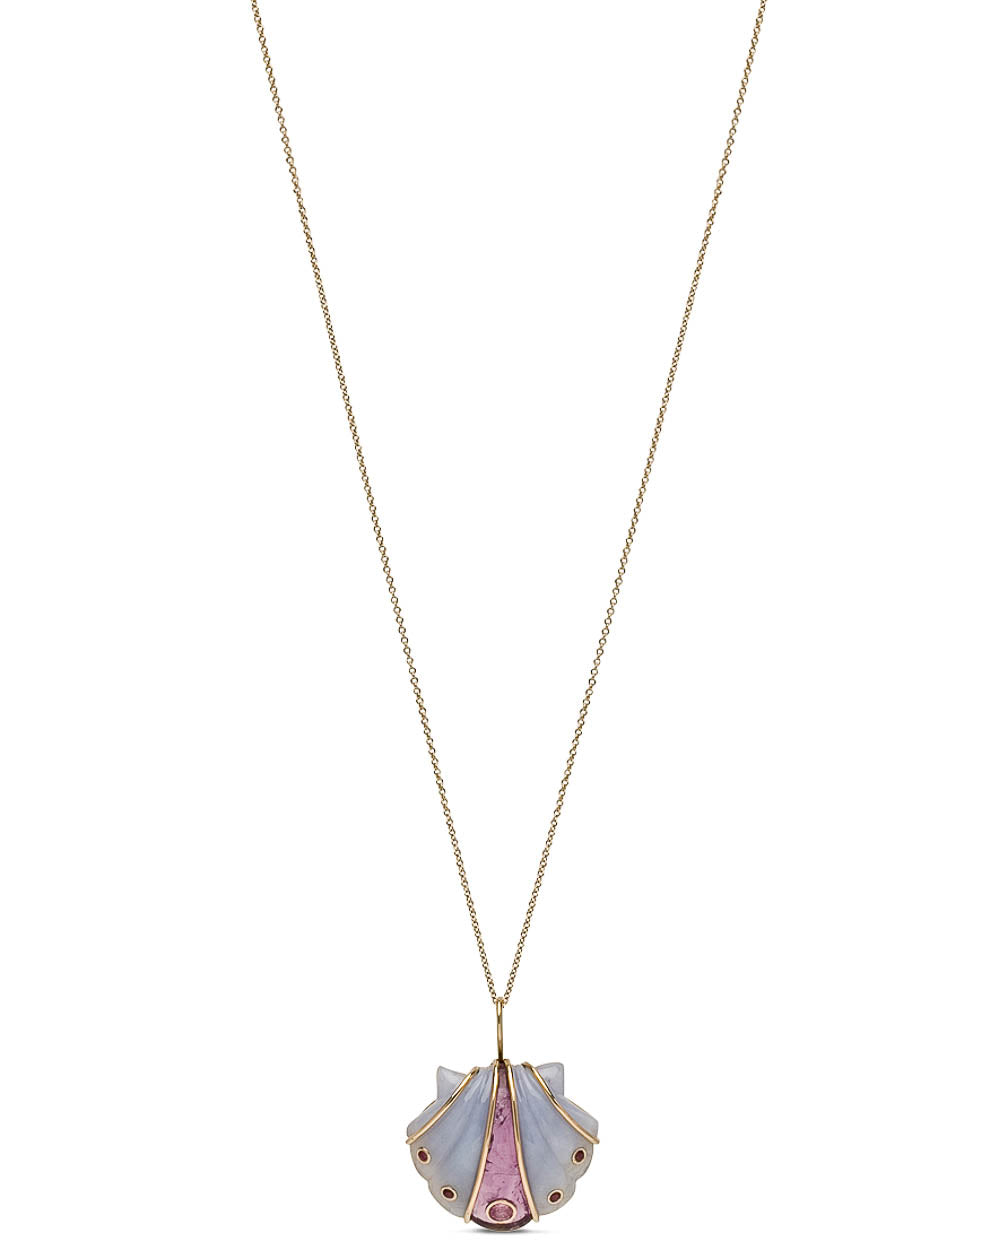 Necklace by Designer Get it now - Squash Blossom Vail Tagged 